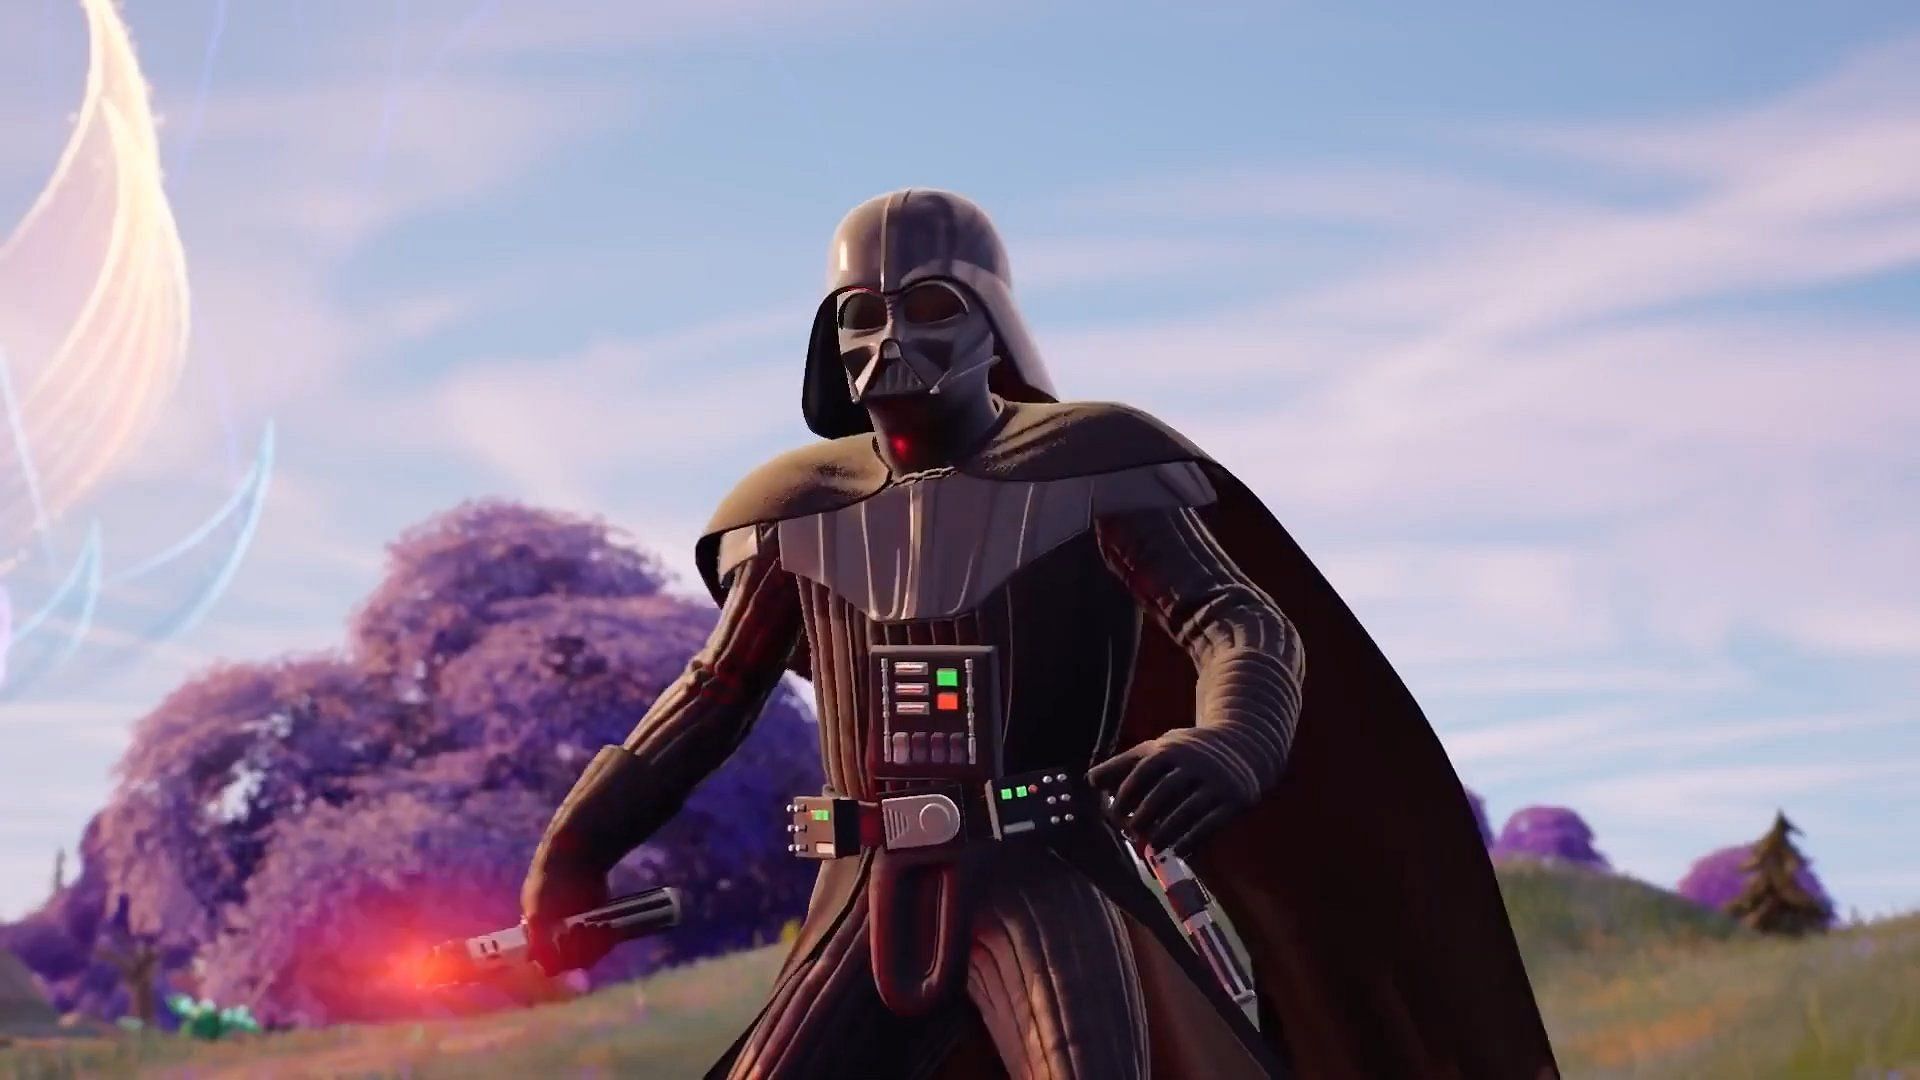 Darth Vader has finally made it to the game. (Image via Epic Games)